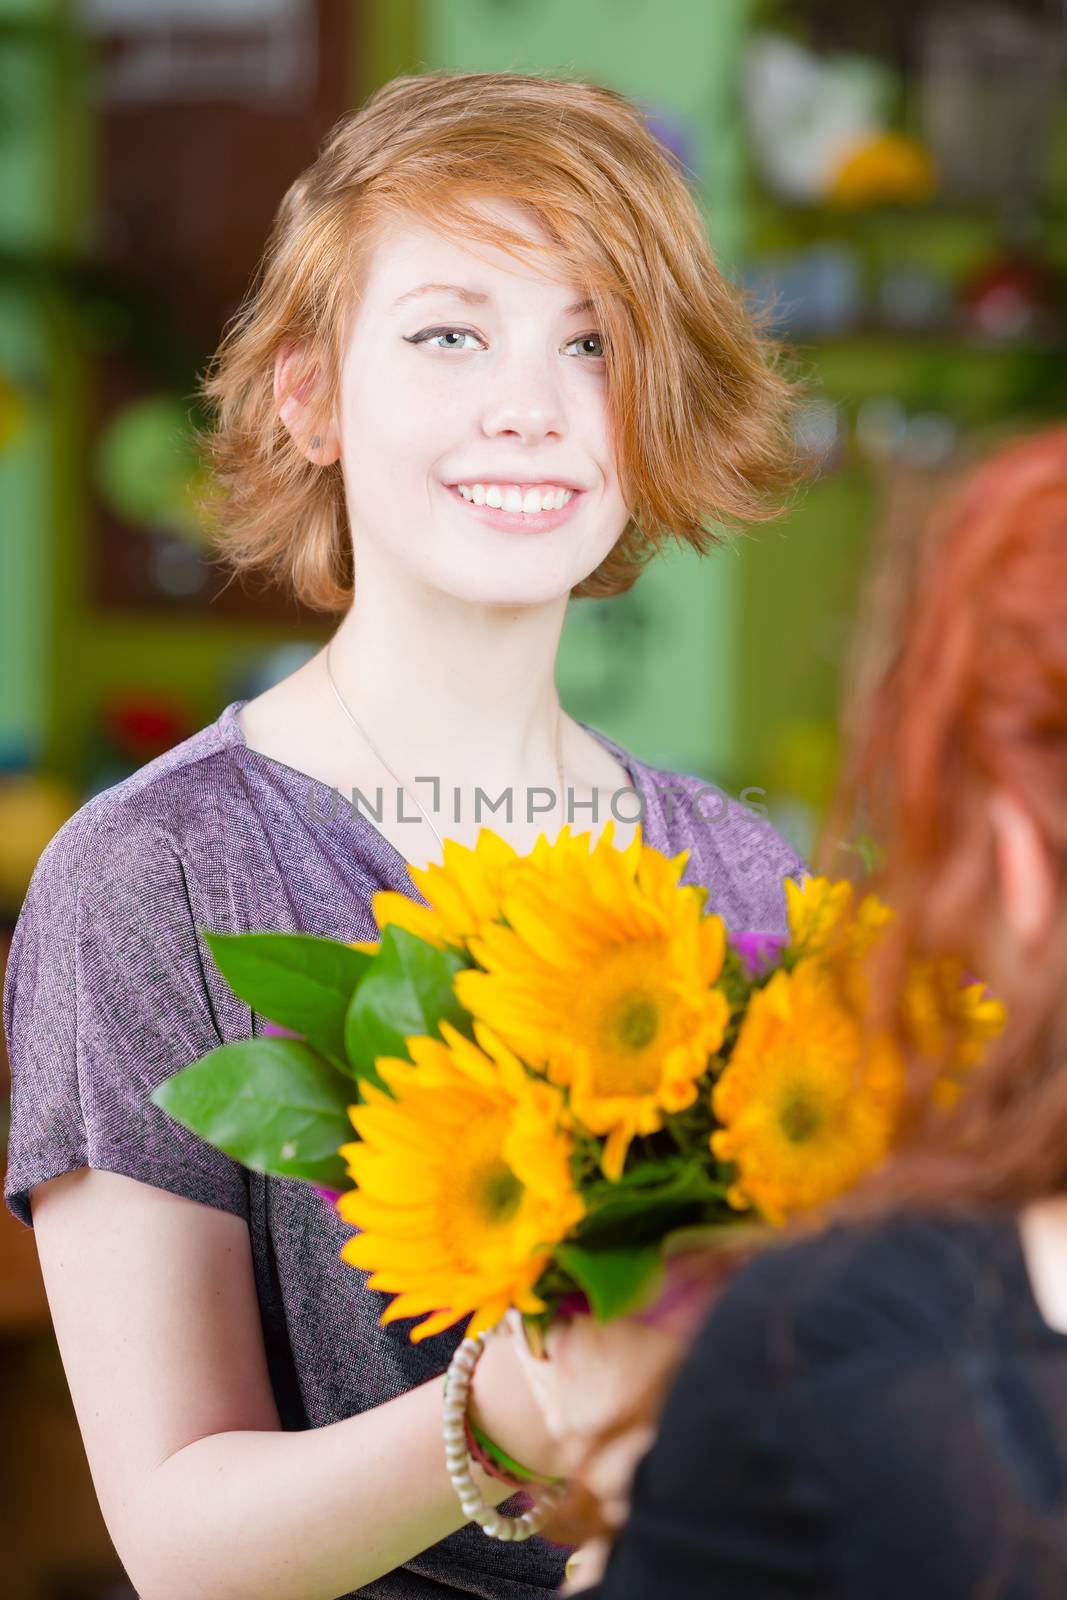 Teenage red haired girl buying sunflowers at a florist shop